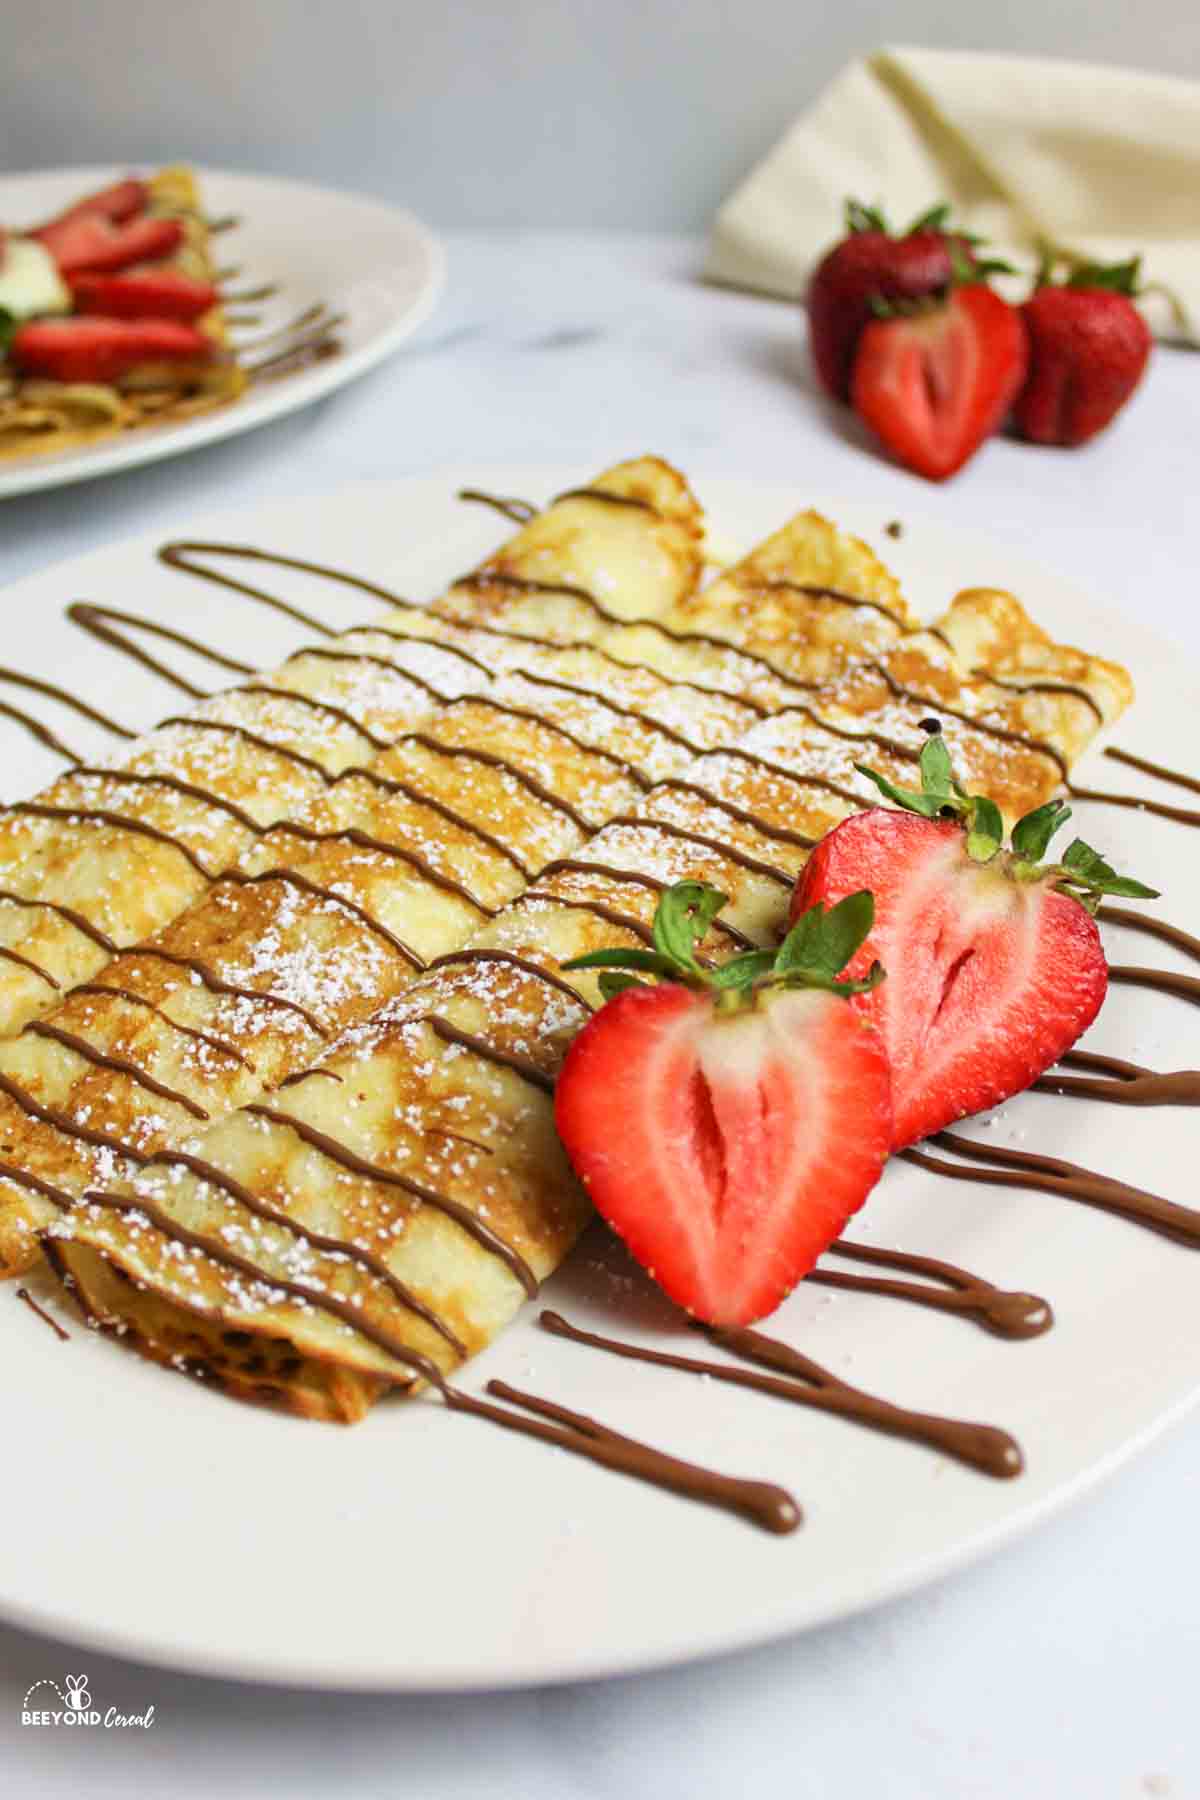 pancake mix crepes rolled on a plate with chocolate drizzle powdered sugar and fresh strawberries.